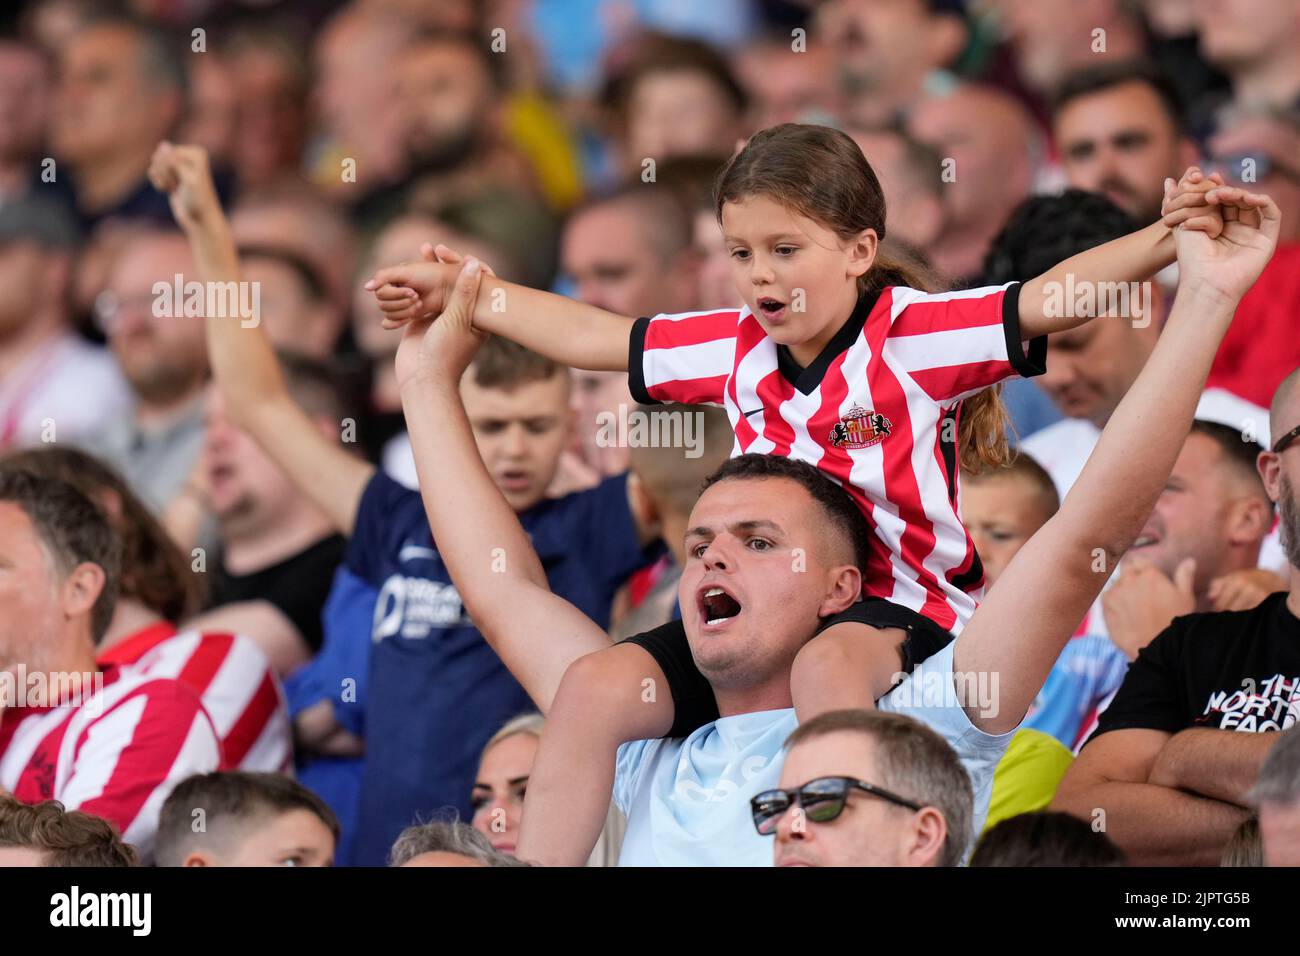 Sunderland fans greet their side on the pitch  in Stoke-on-Trent, United Kingdom on 5/20/2016. (Photo by Steve Flynn/News Images/Sipa USA) Stock Photo